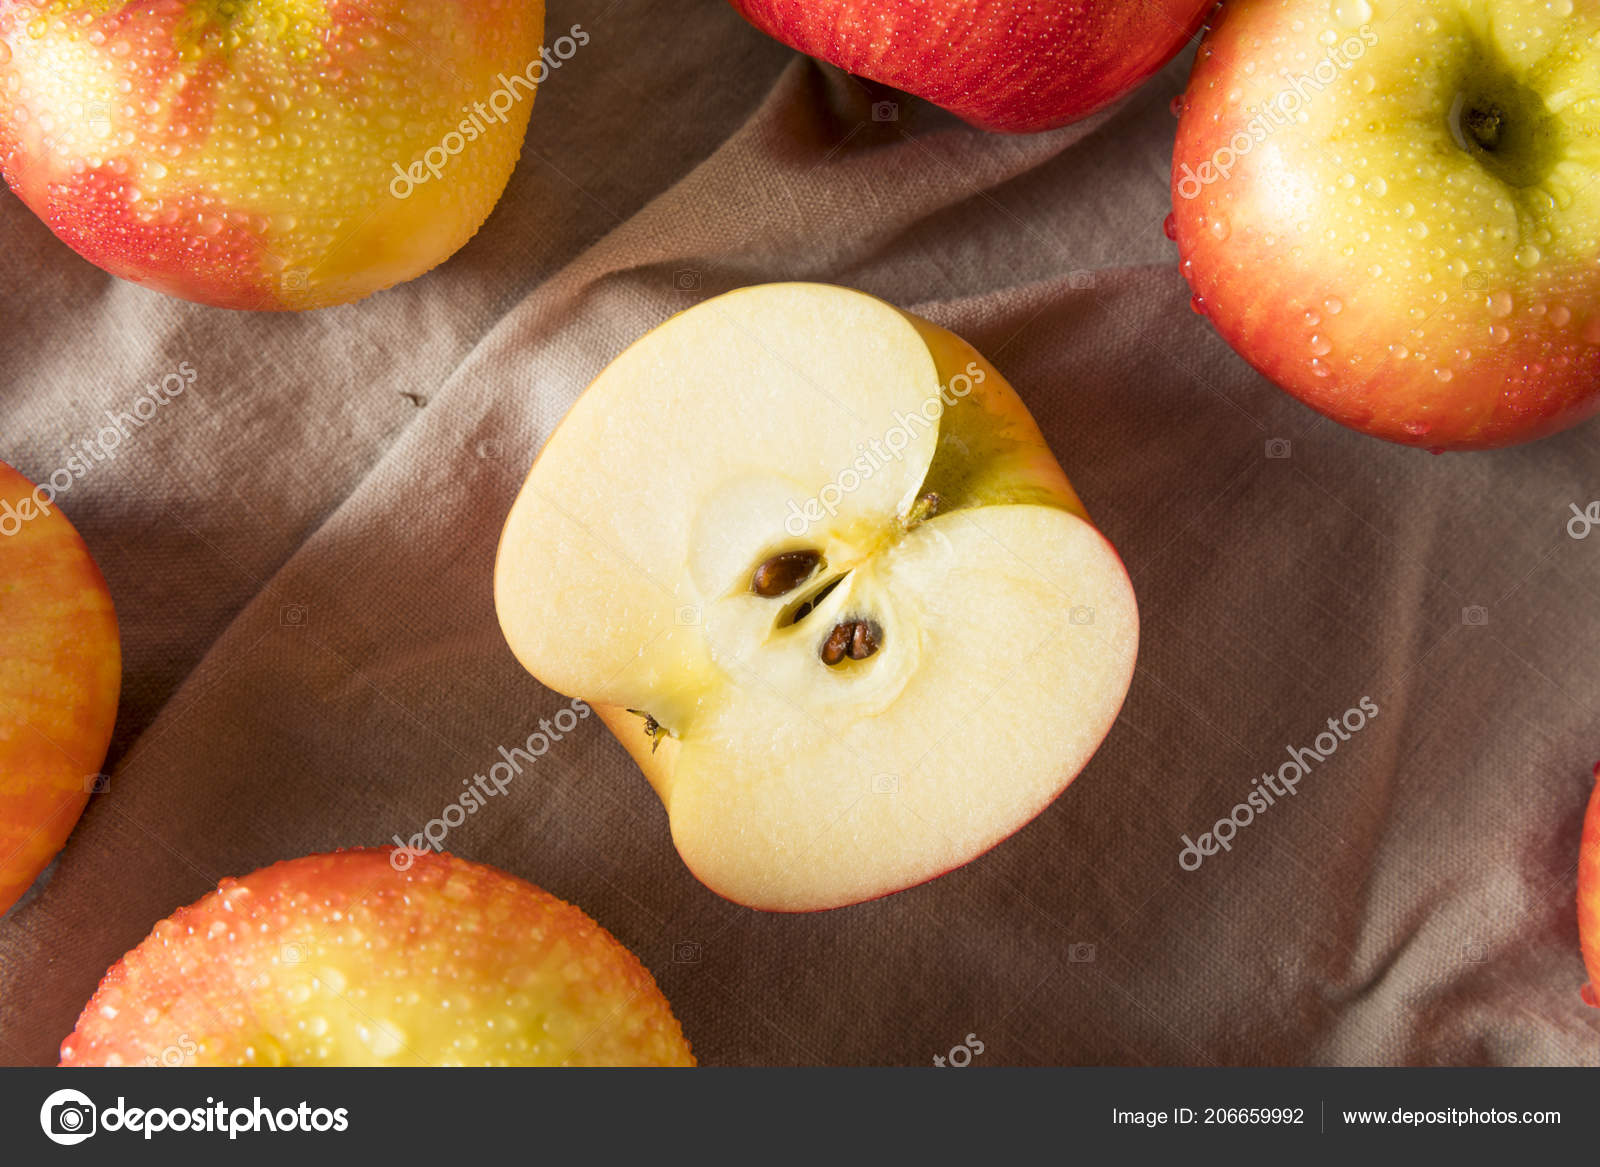 Raw Red Organic Envy Apples Stock Photo by bhofack2